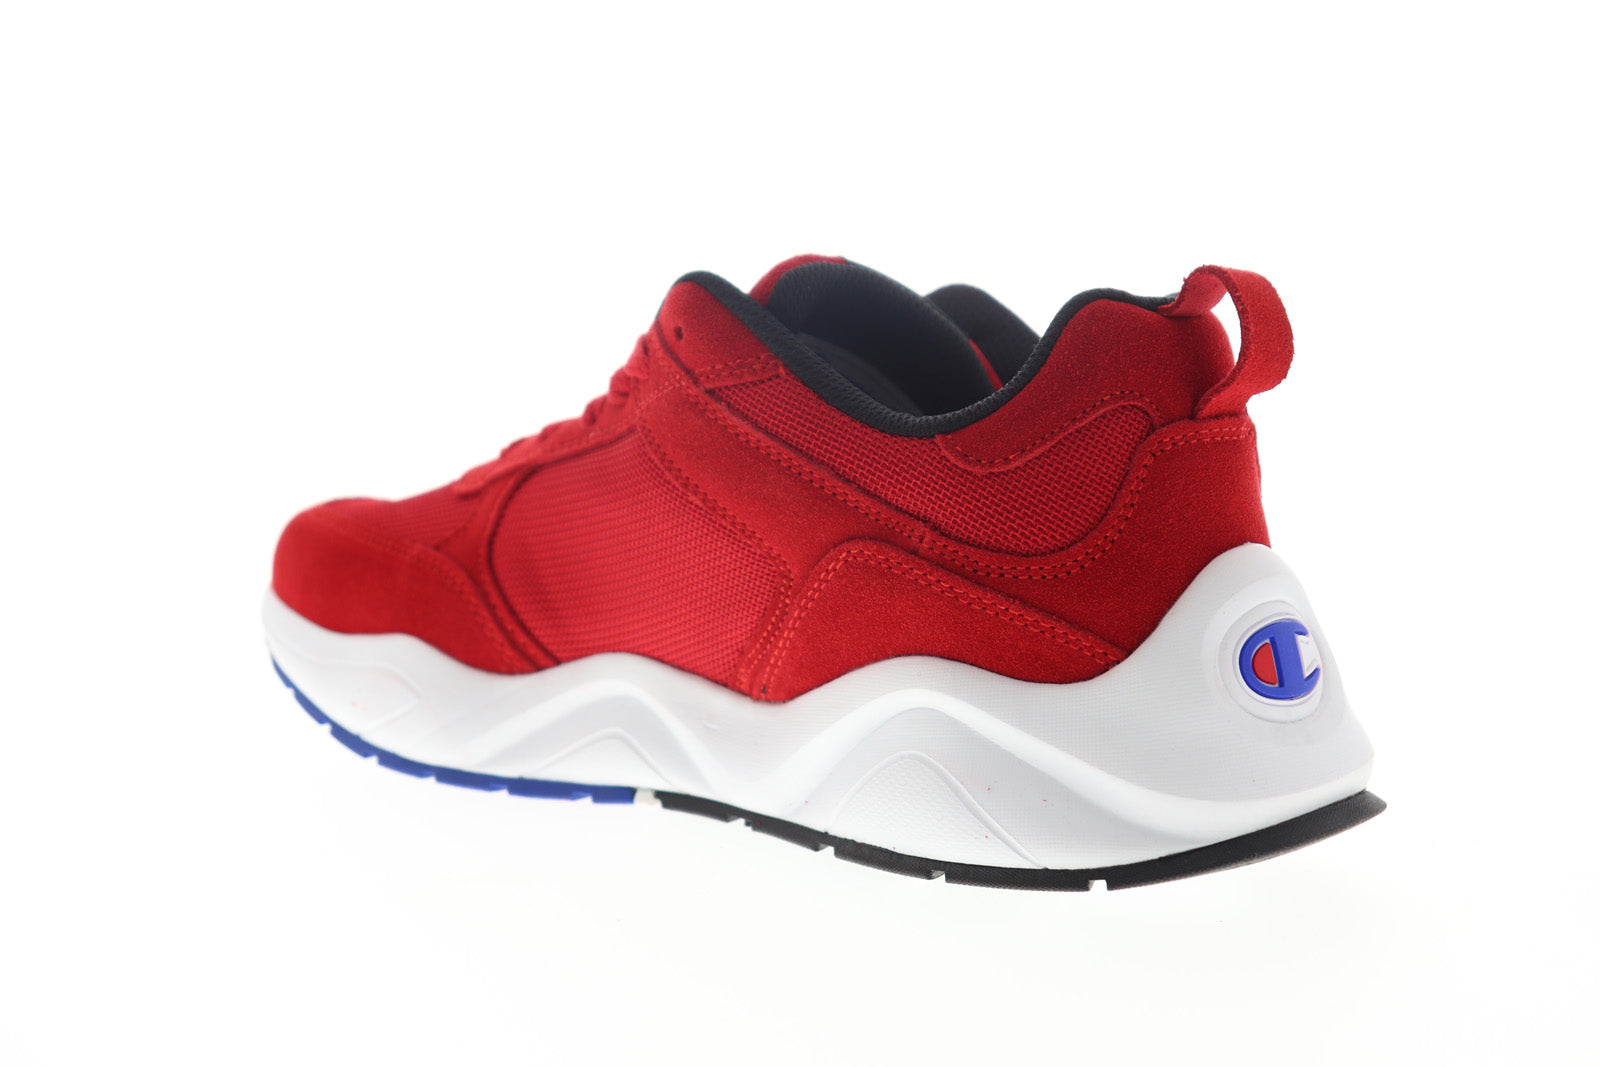 Queen Band Ow Running Shoes Embody New AOP For Men And Women Max Soul  Sneakers Fans Gift Red - Freedomdesign